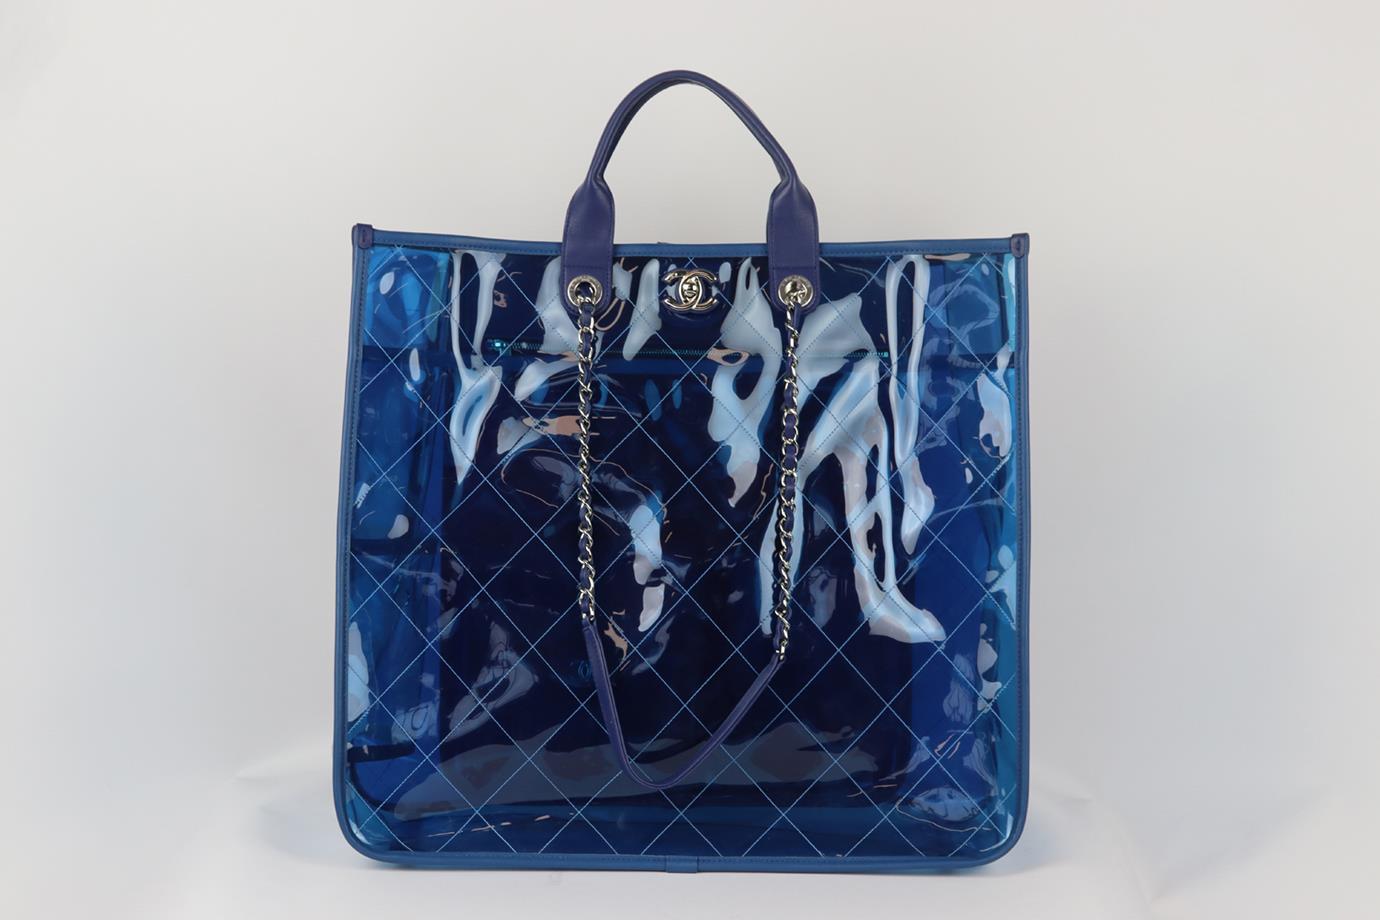 <ul>
<li>Chanel 2018 Coco Splash quilted perspex and leather tote bag.</li>
<li>Made in Italy, this beautiful 2018 ‘Coco Splash’ tote bag has been made from blue quilted perspex exterior with blue leather interior detail, this piece is decorated